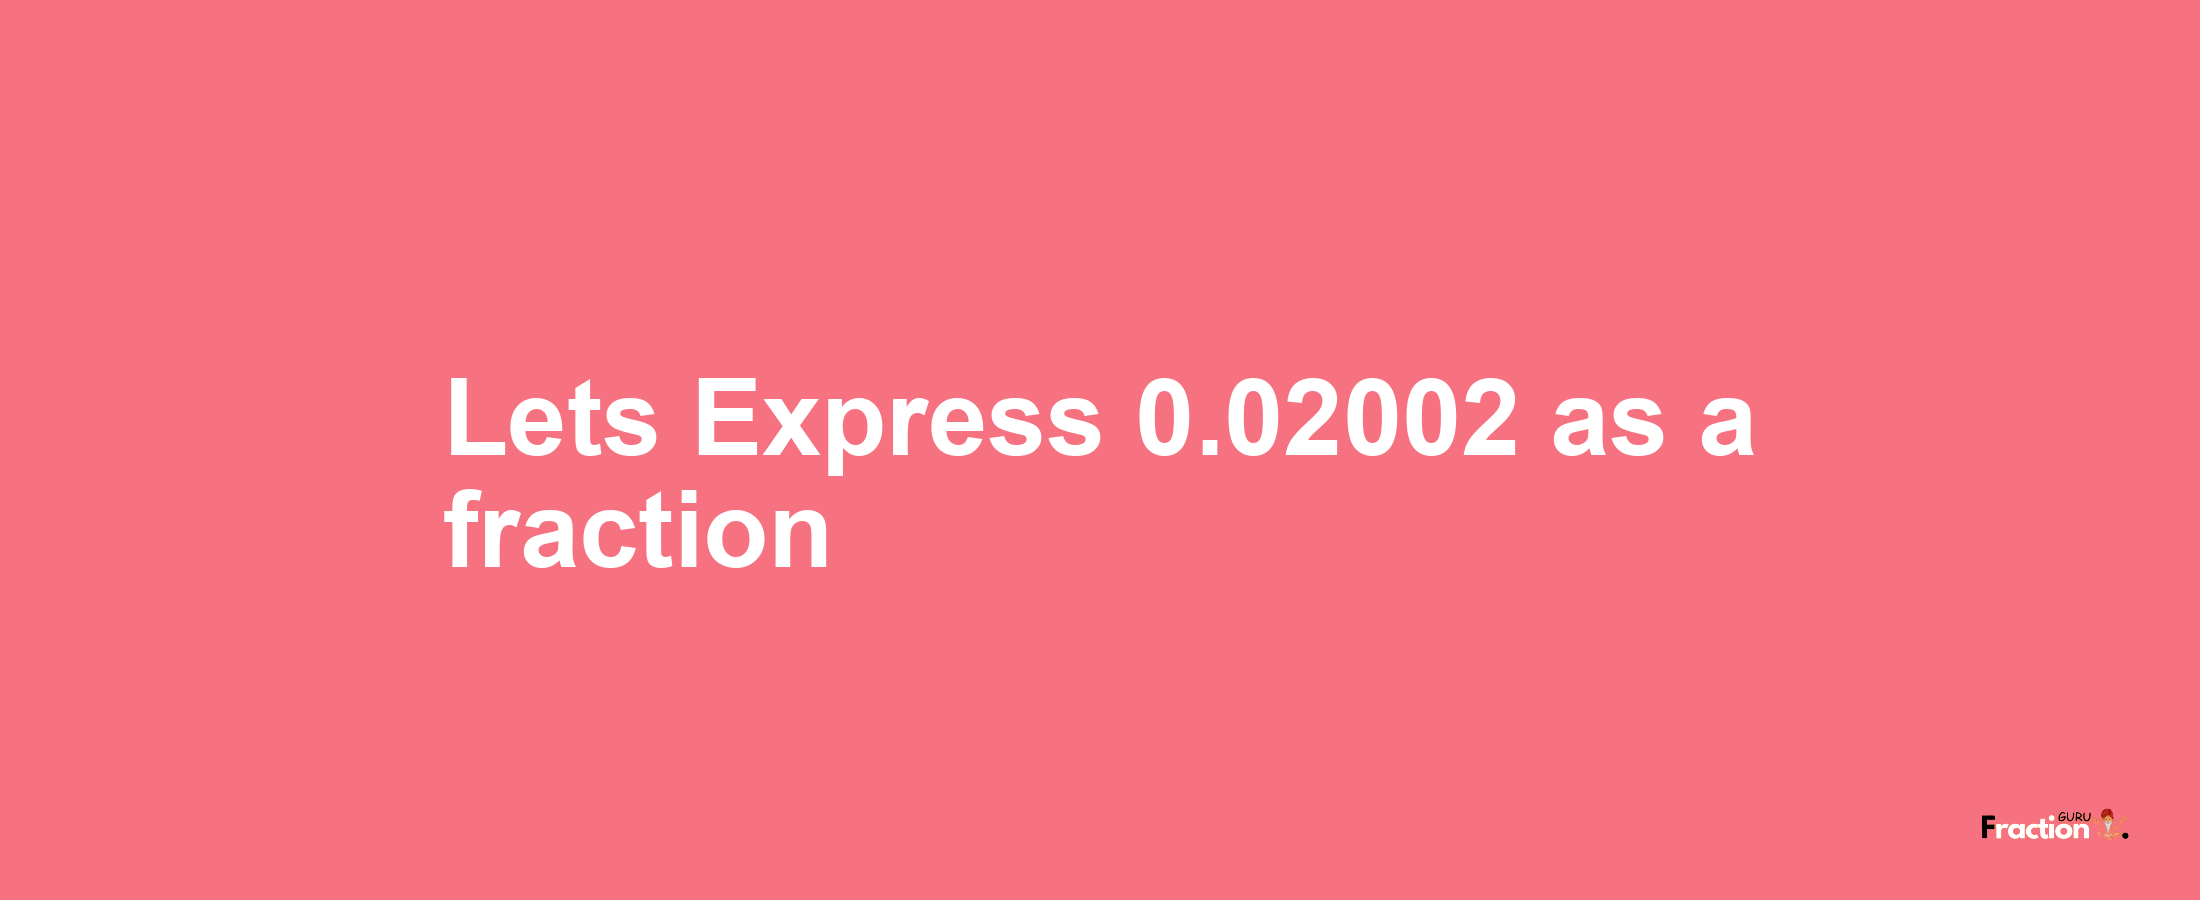 Lets Express 0.02002 as afraction